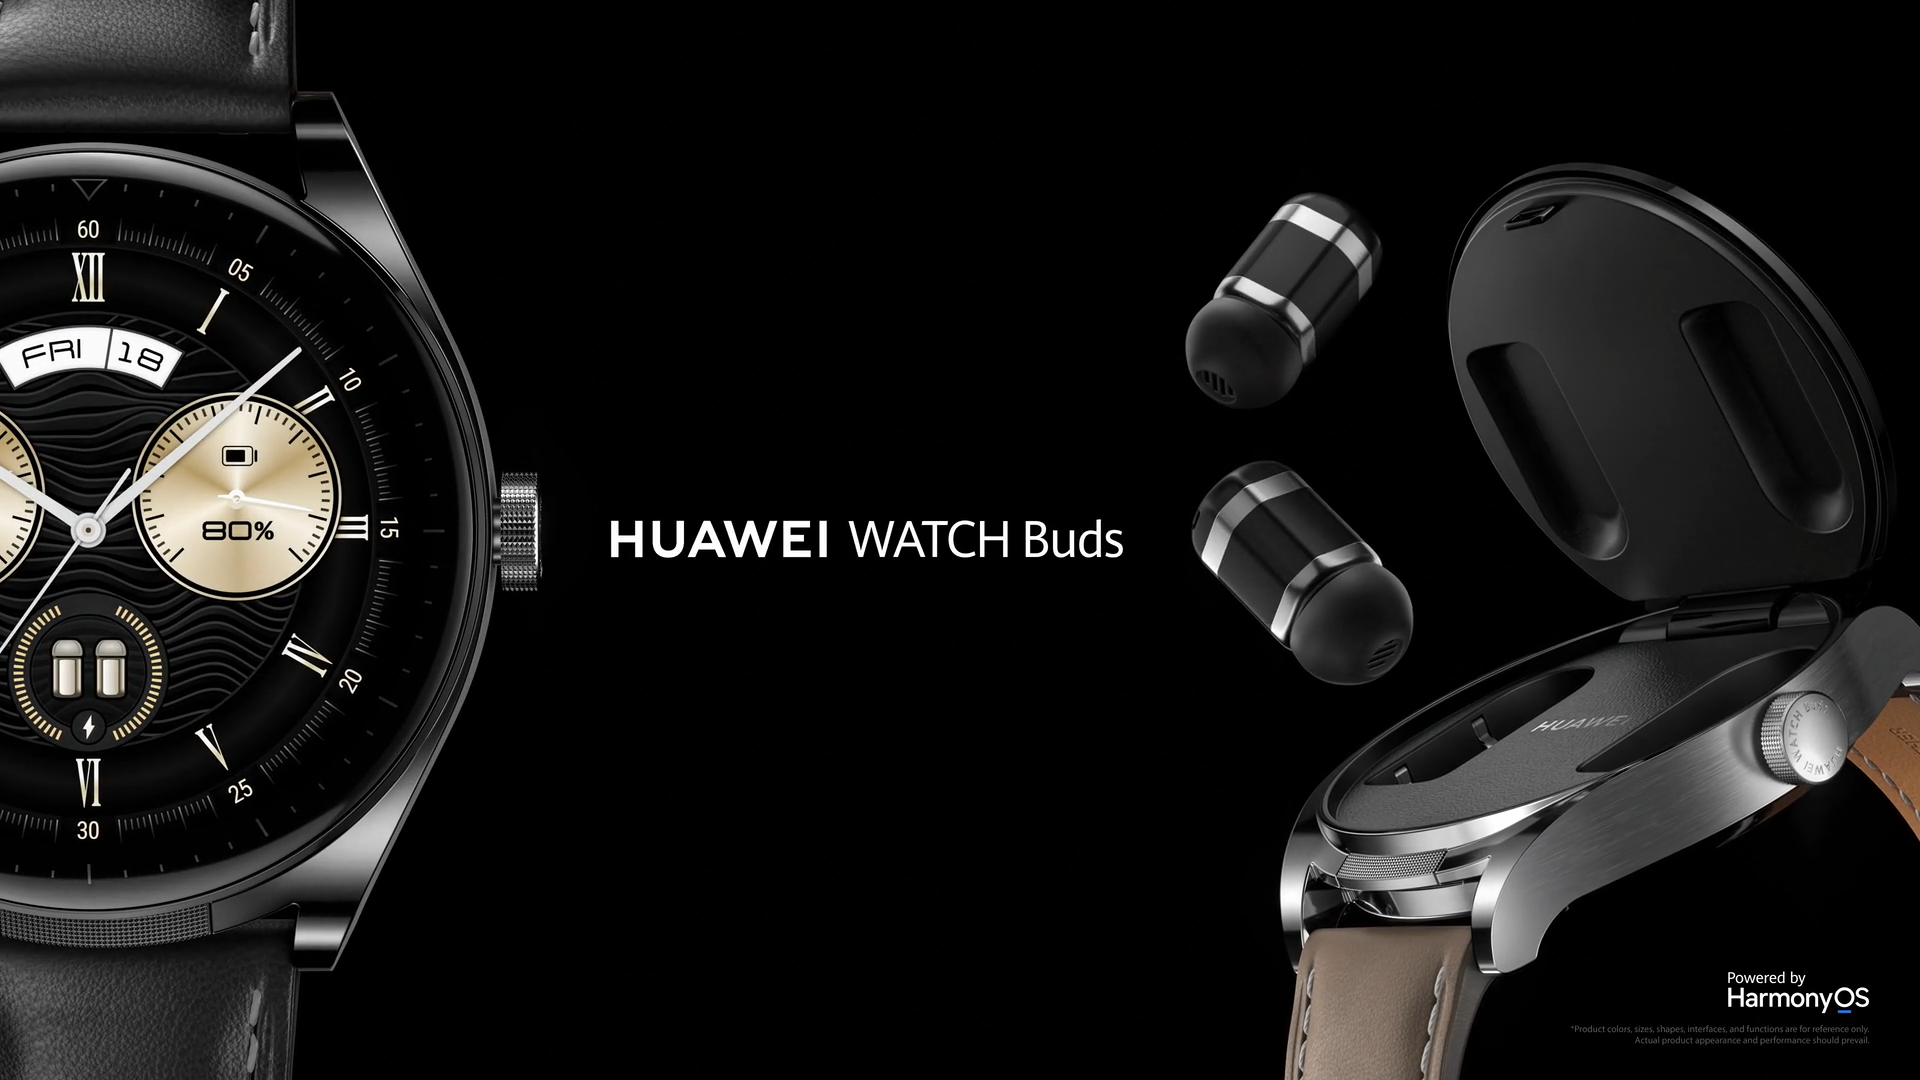 Huawei's Watch Buds ask: “What if your smartwatch also contained